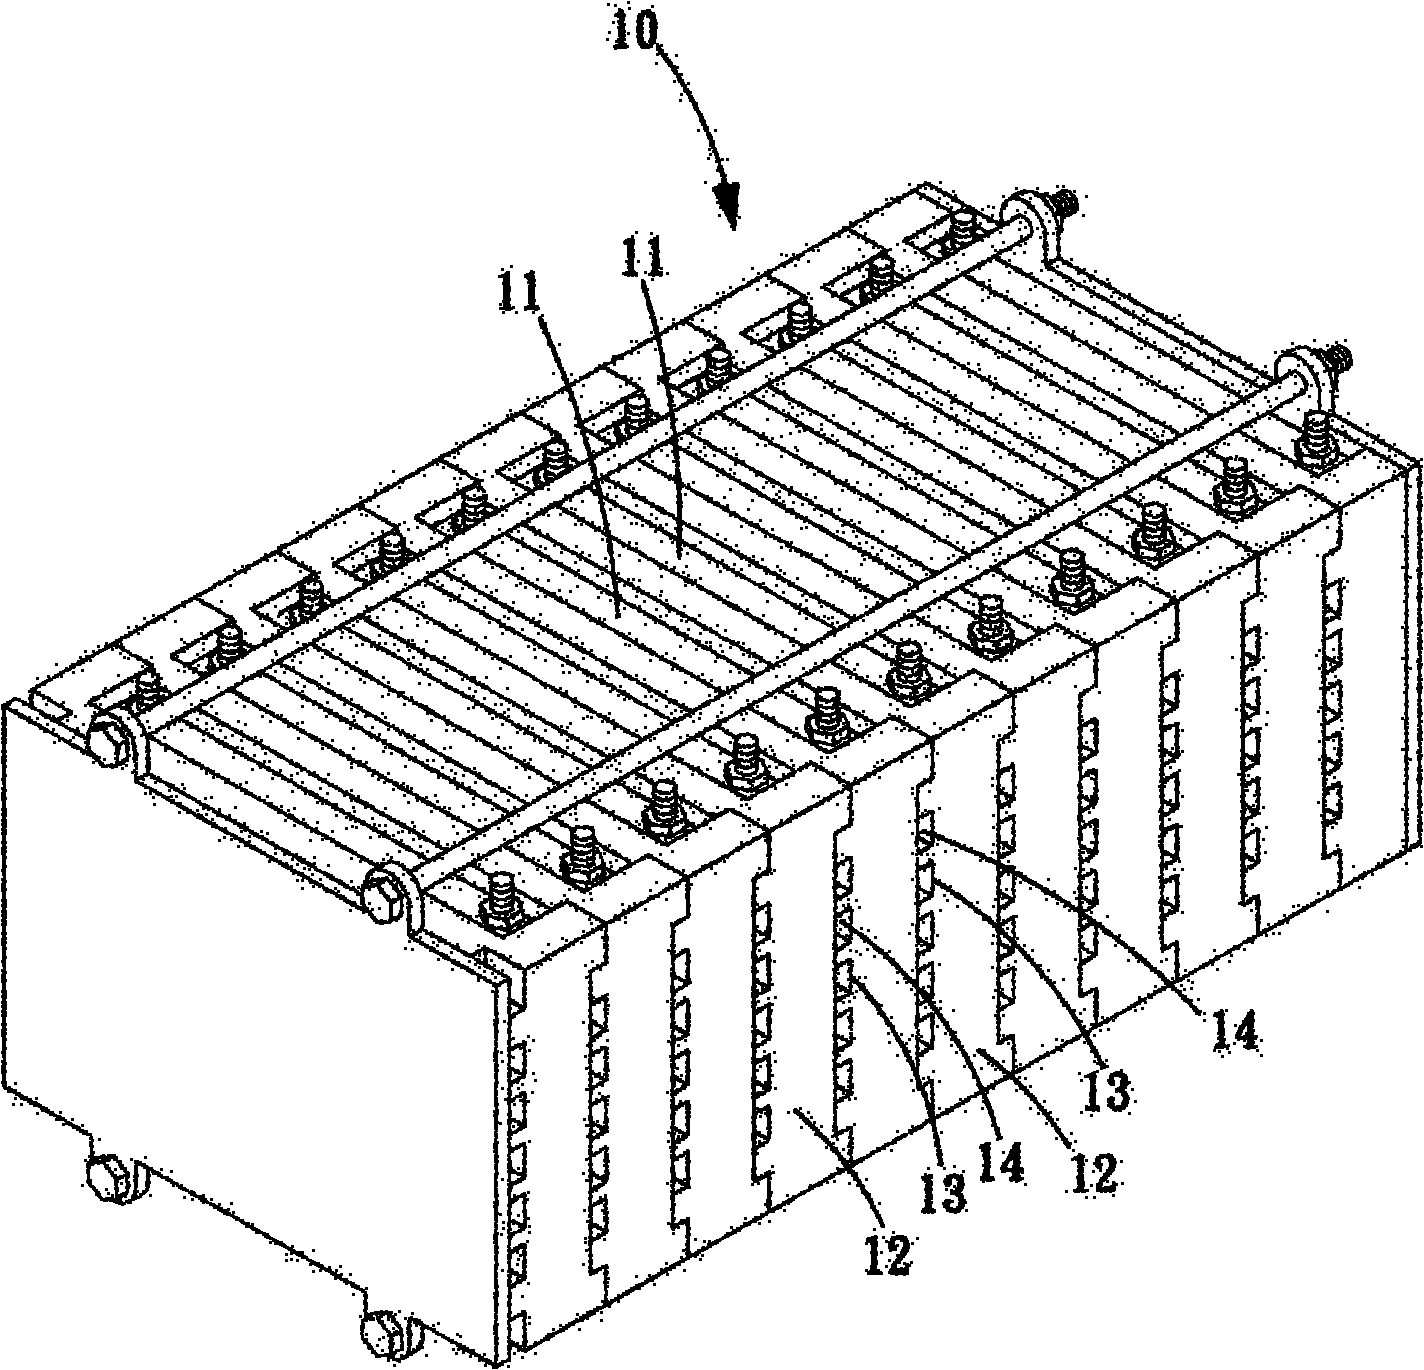 Heat radiation structure aggregate cell superimposed by multiple cell modules